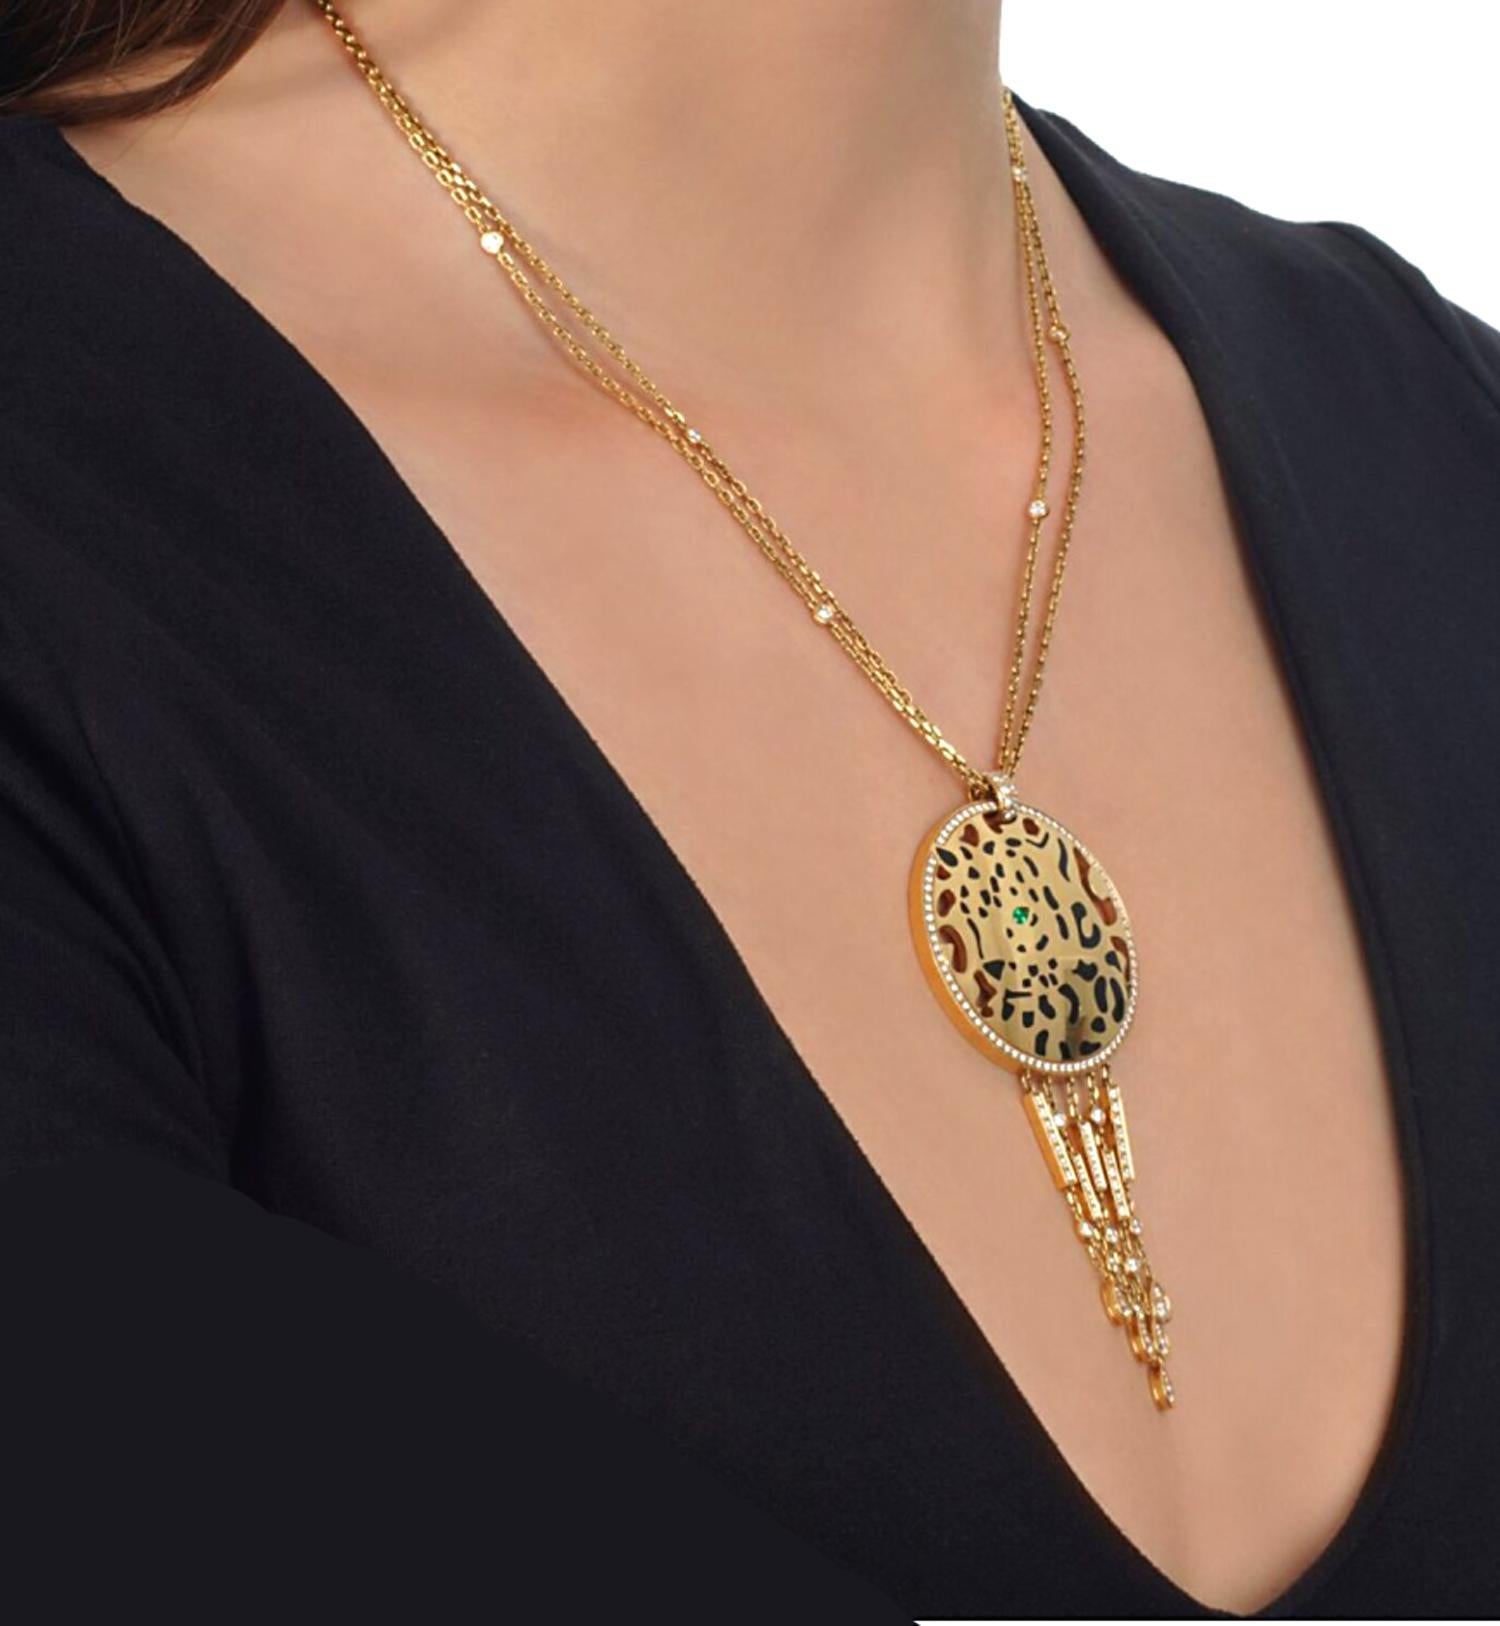 The Cartier Panthere Yellow Gold Diamond Necklace is a masterpiece of craftsmanship and elegance, embodying the luxurious and innovative spirit of Cartier's design. The necklace features a stunning circular motif as its centerpiece, meticulously